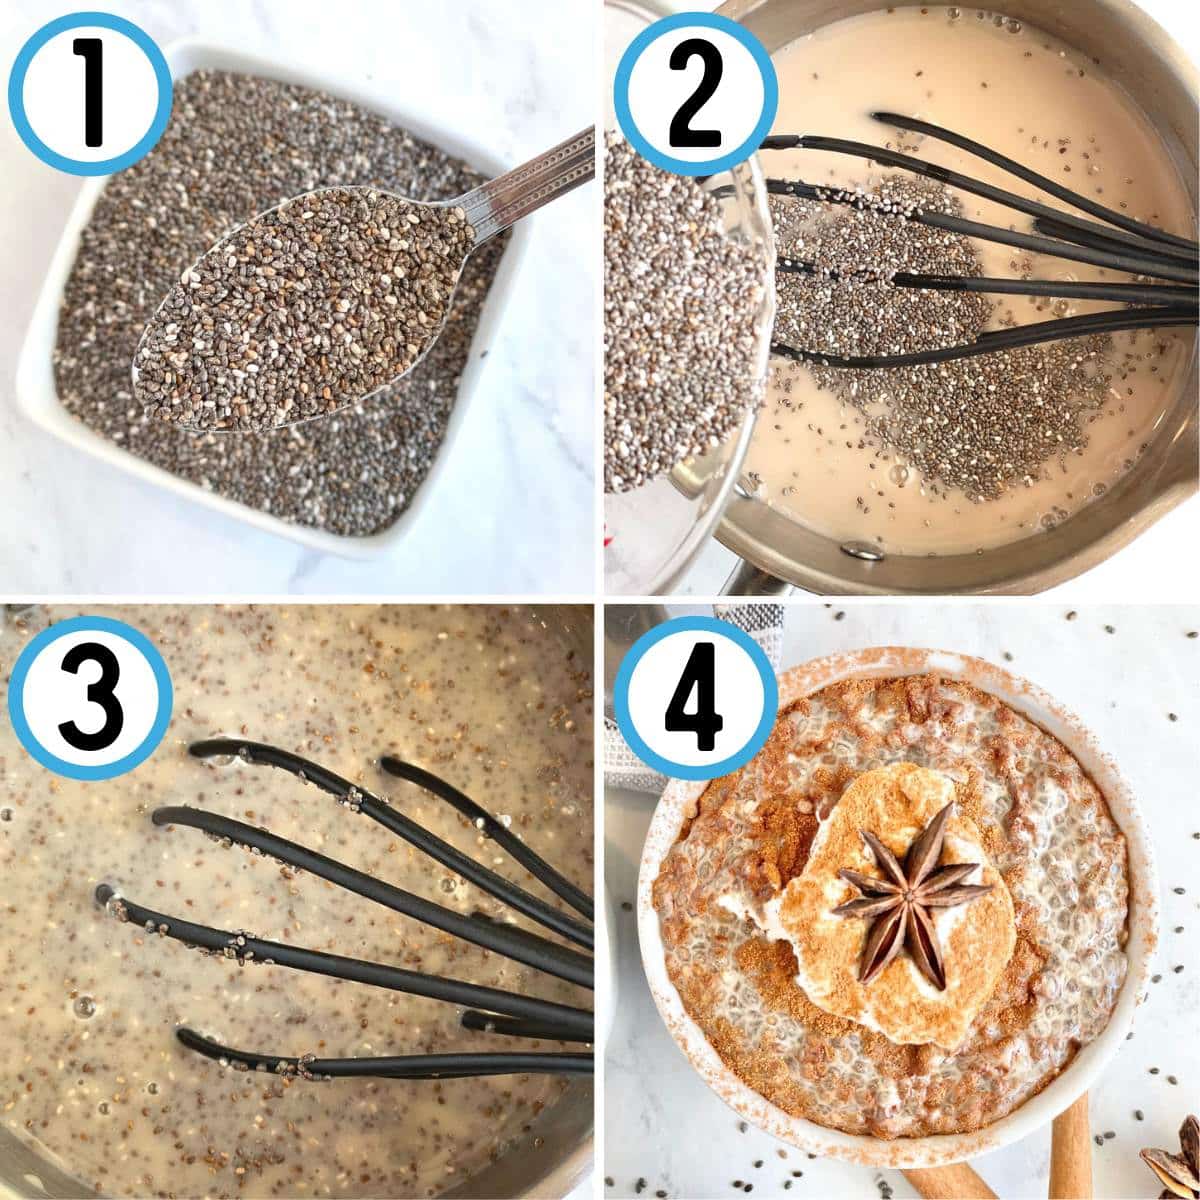 Step by step guide to making chai chia pudding. 1. Start with good chia seeds. 2. Mix chia seeds with chia concentrate and milk in a saucepan. 3. Continue to mix until combined. 4. Serve chilled in a bowl with a dollop of whipped cream and enjoy.